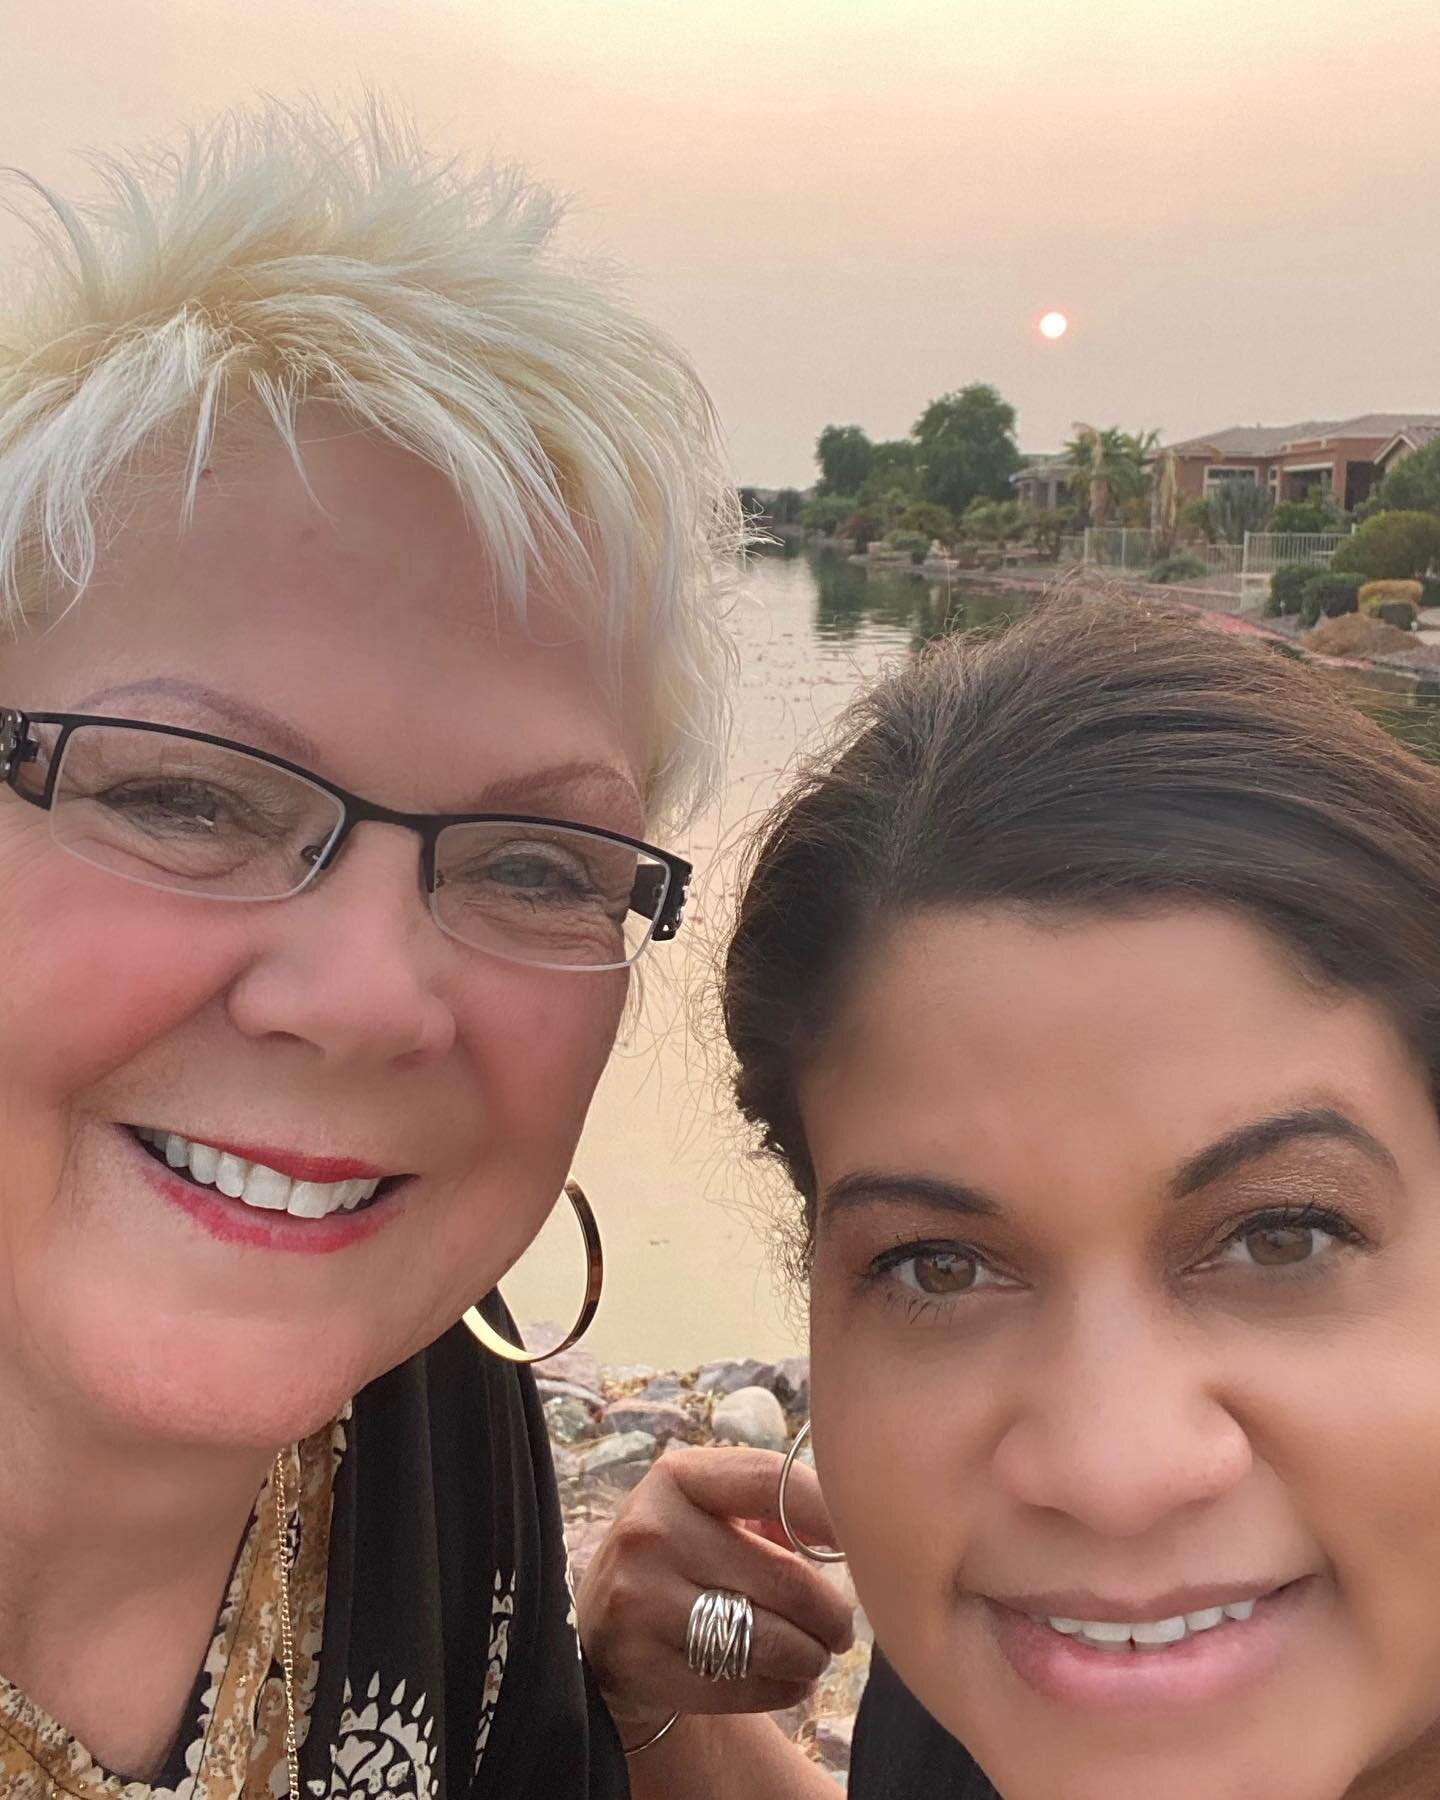 SUNSET in Maricopa.🌵☀️
Many people have asked me how my move has been to Arizona.
It&rsquo;s so PEACEFUL in this little city and I am so grateful for PATRICIA KING. She is an AMAZING leader, friend, pastor, spiritual mother and she makes everyone ar